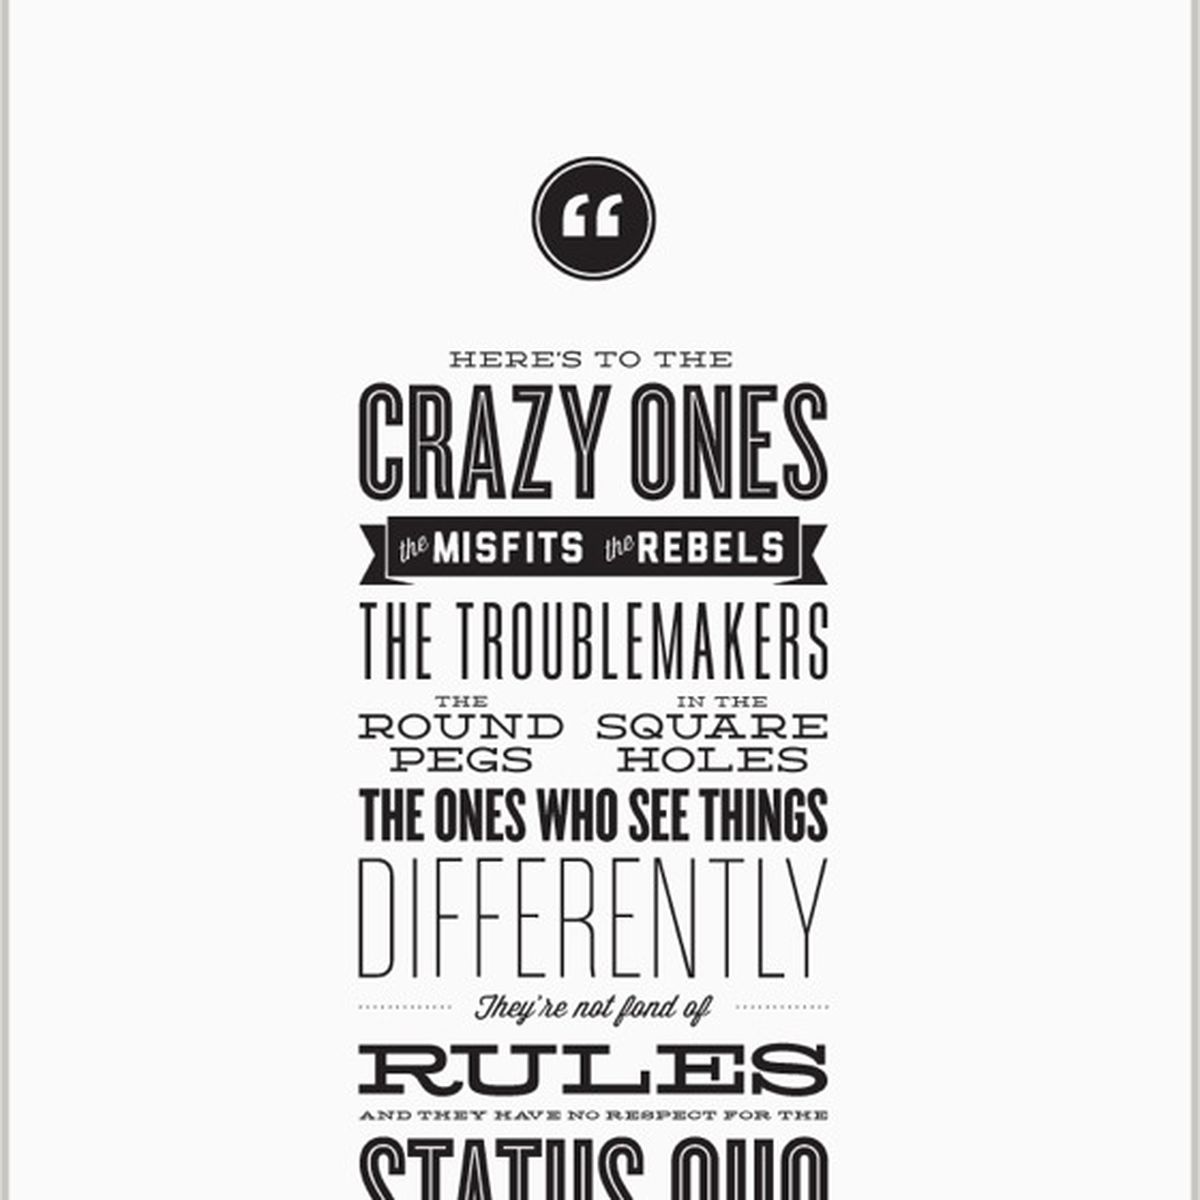 Brightwurks Debuts 'Here'S To The Crazy Ones' Letterpress Poster For  Charity [Update: Pulled] - Macrumors